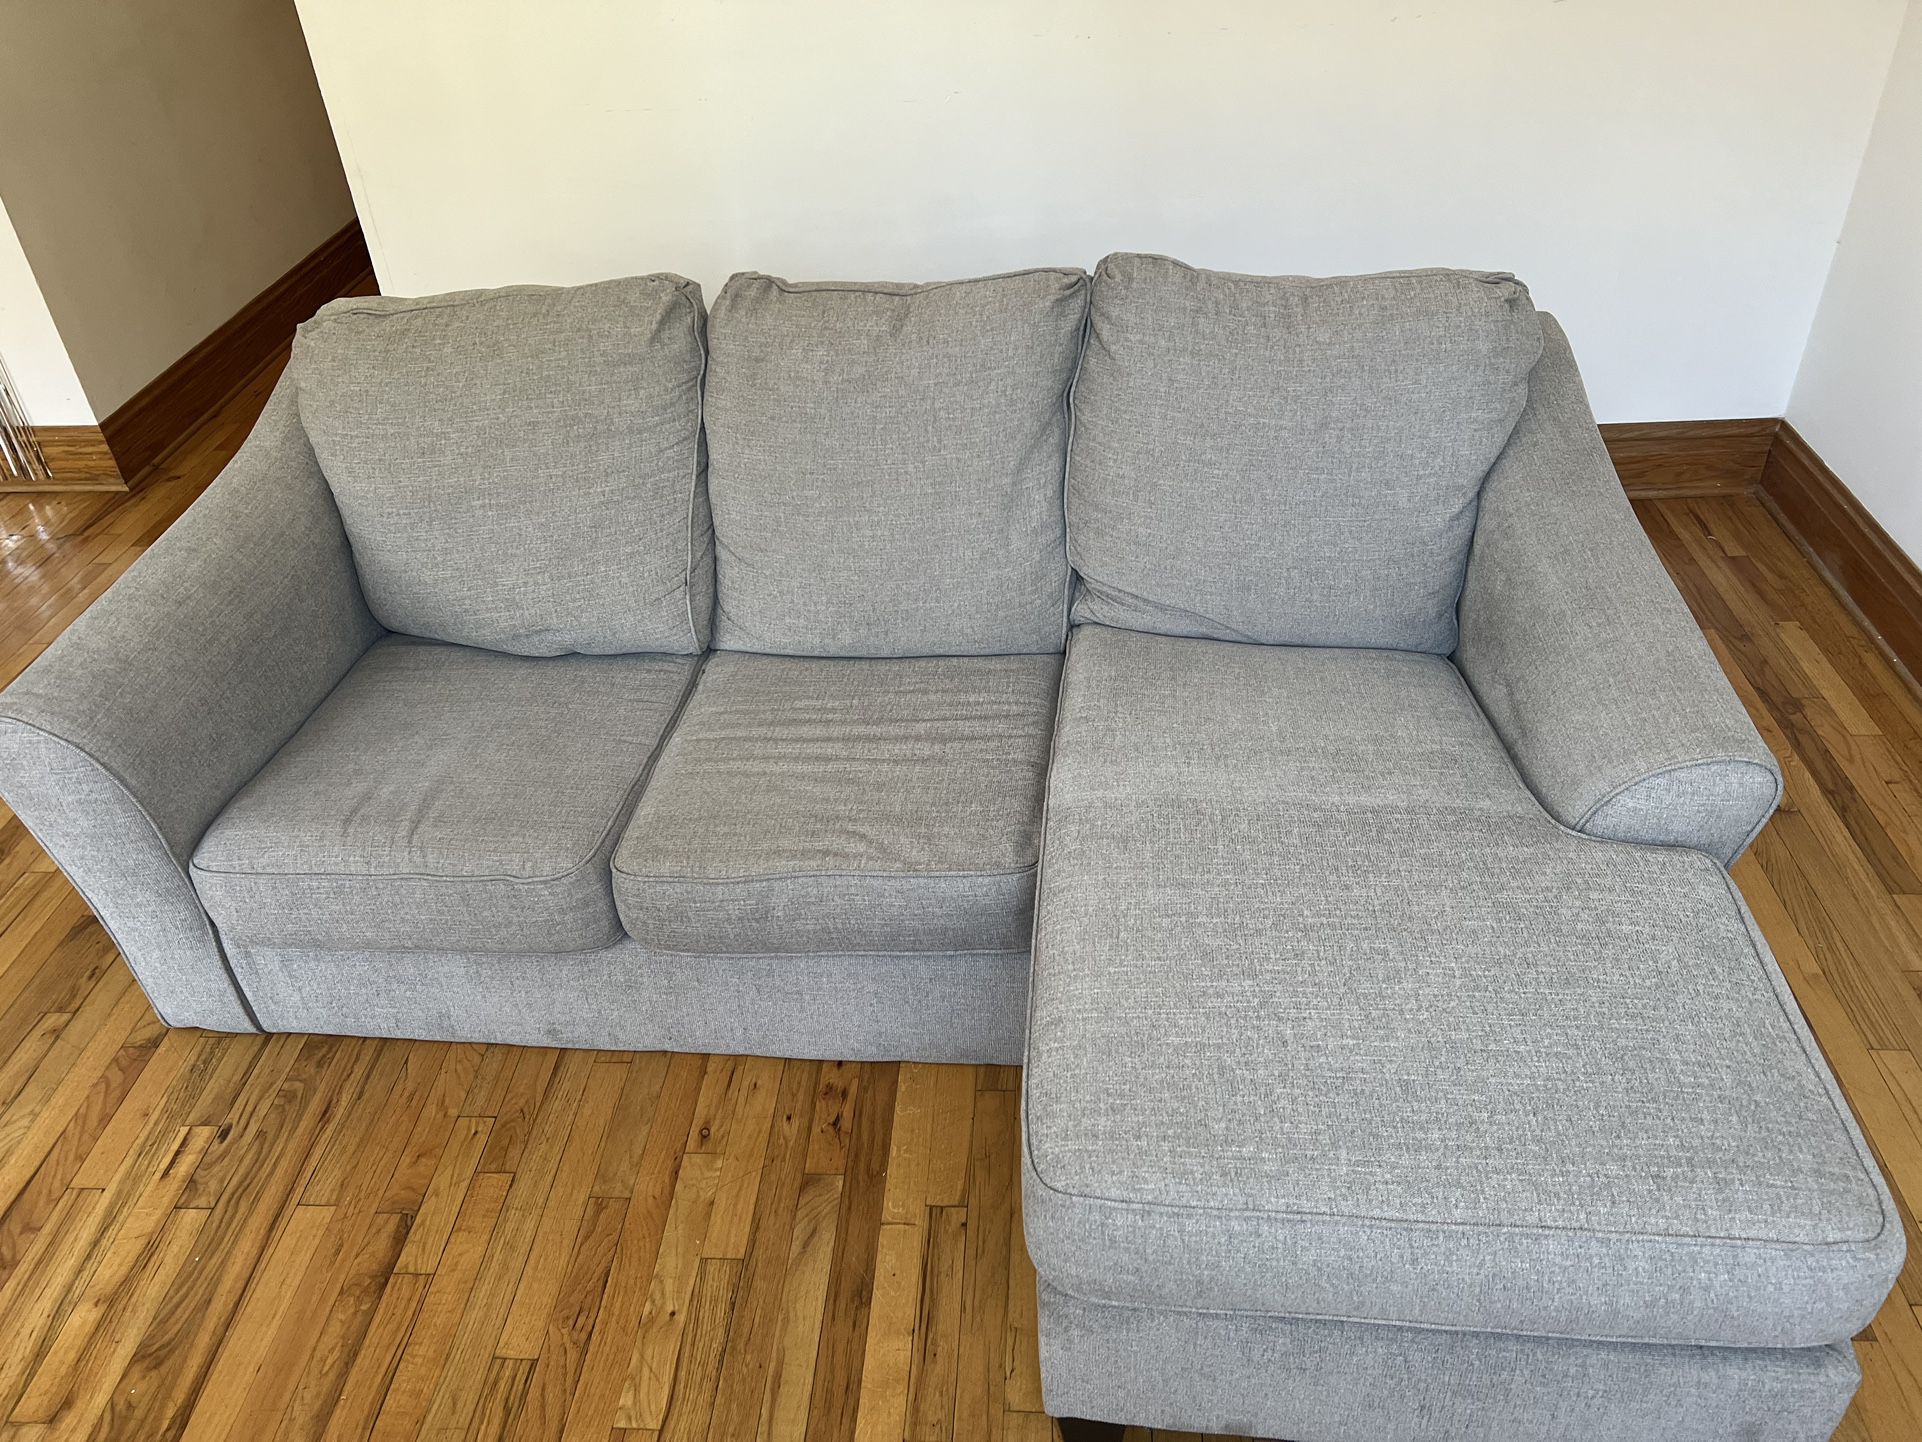 3 Seat Couch With Chaise- Pick Up By 4/29!